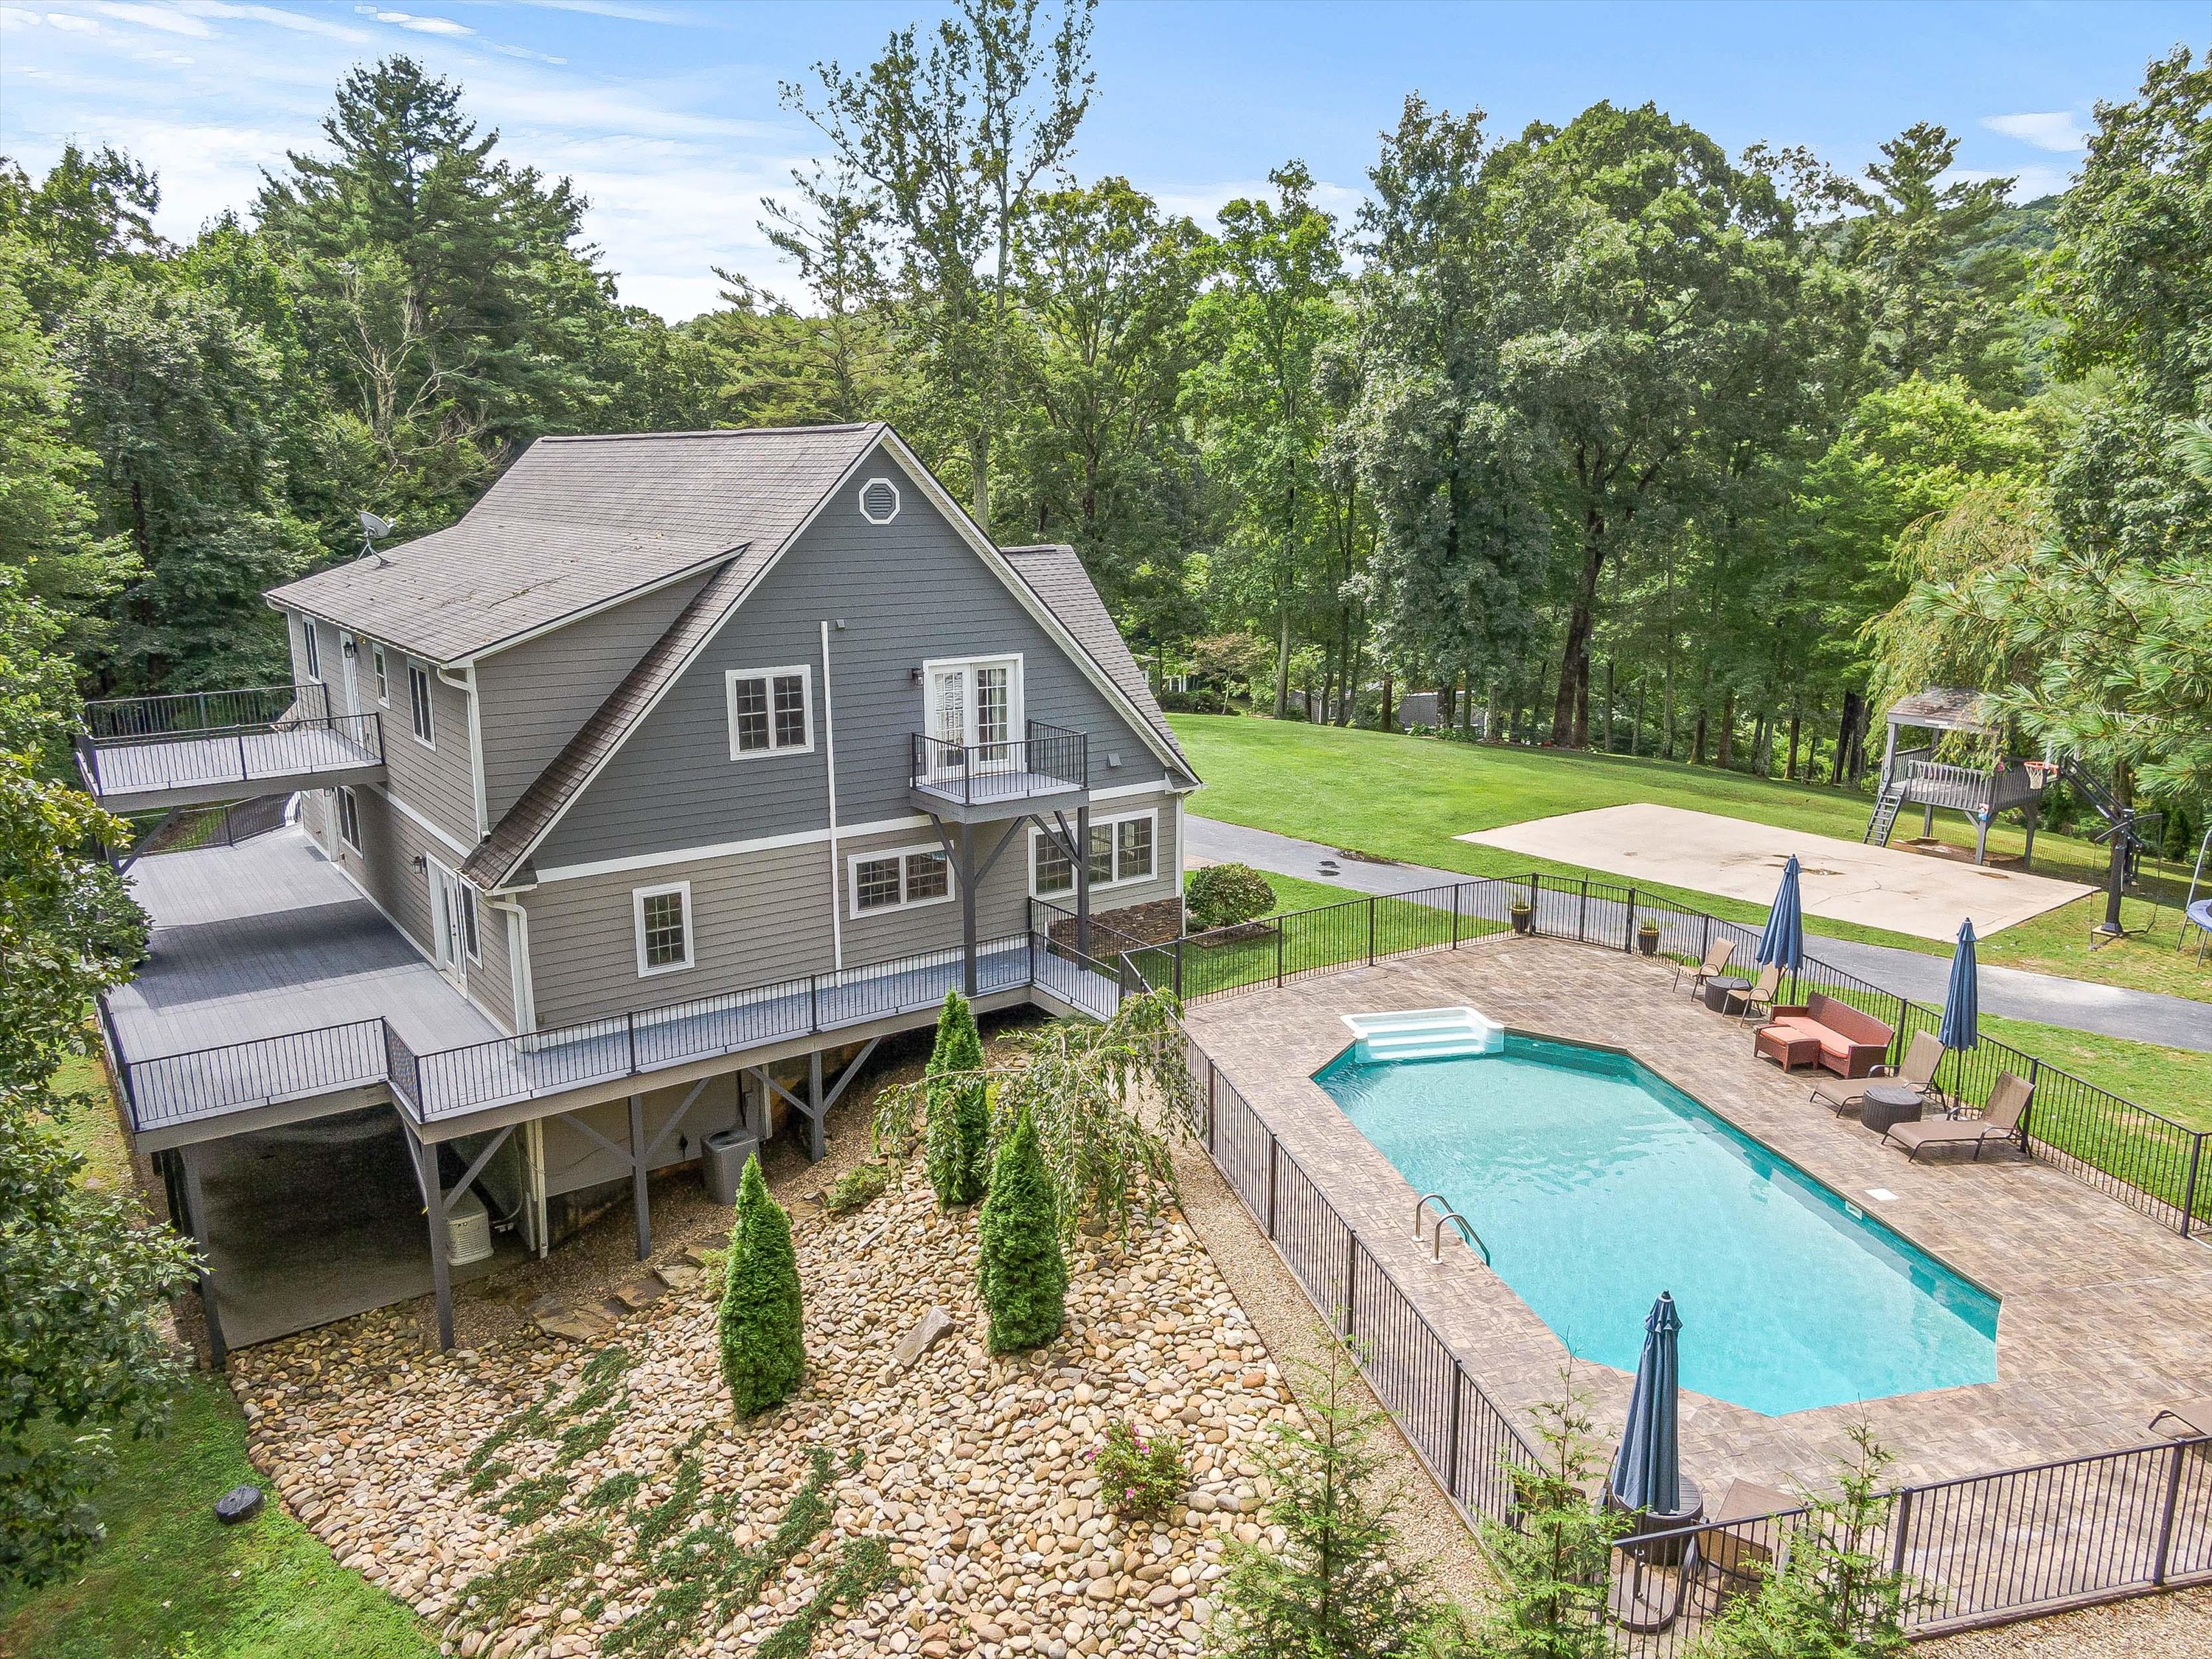 With its expansive yard and outdoor amenities, this property offers everything you need for a large family reunion or group retreat. Invite your furry friend along, they'll love it too!